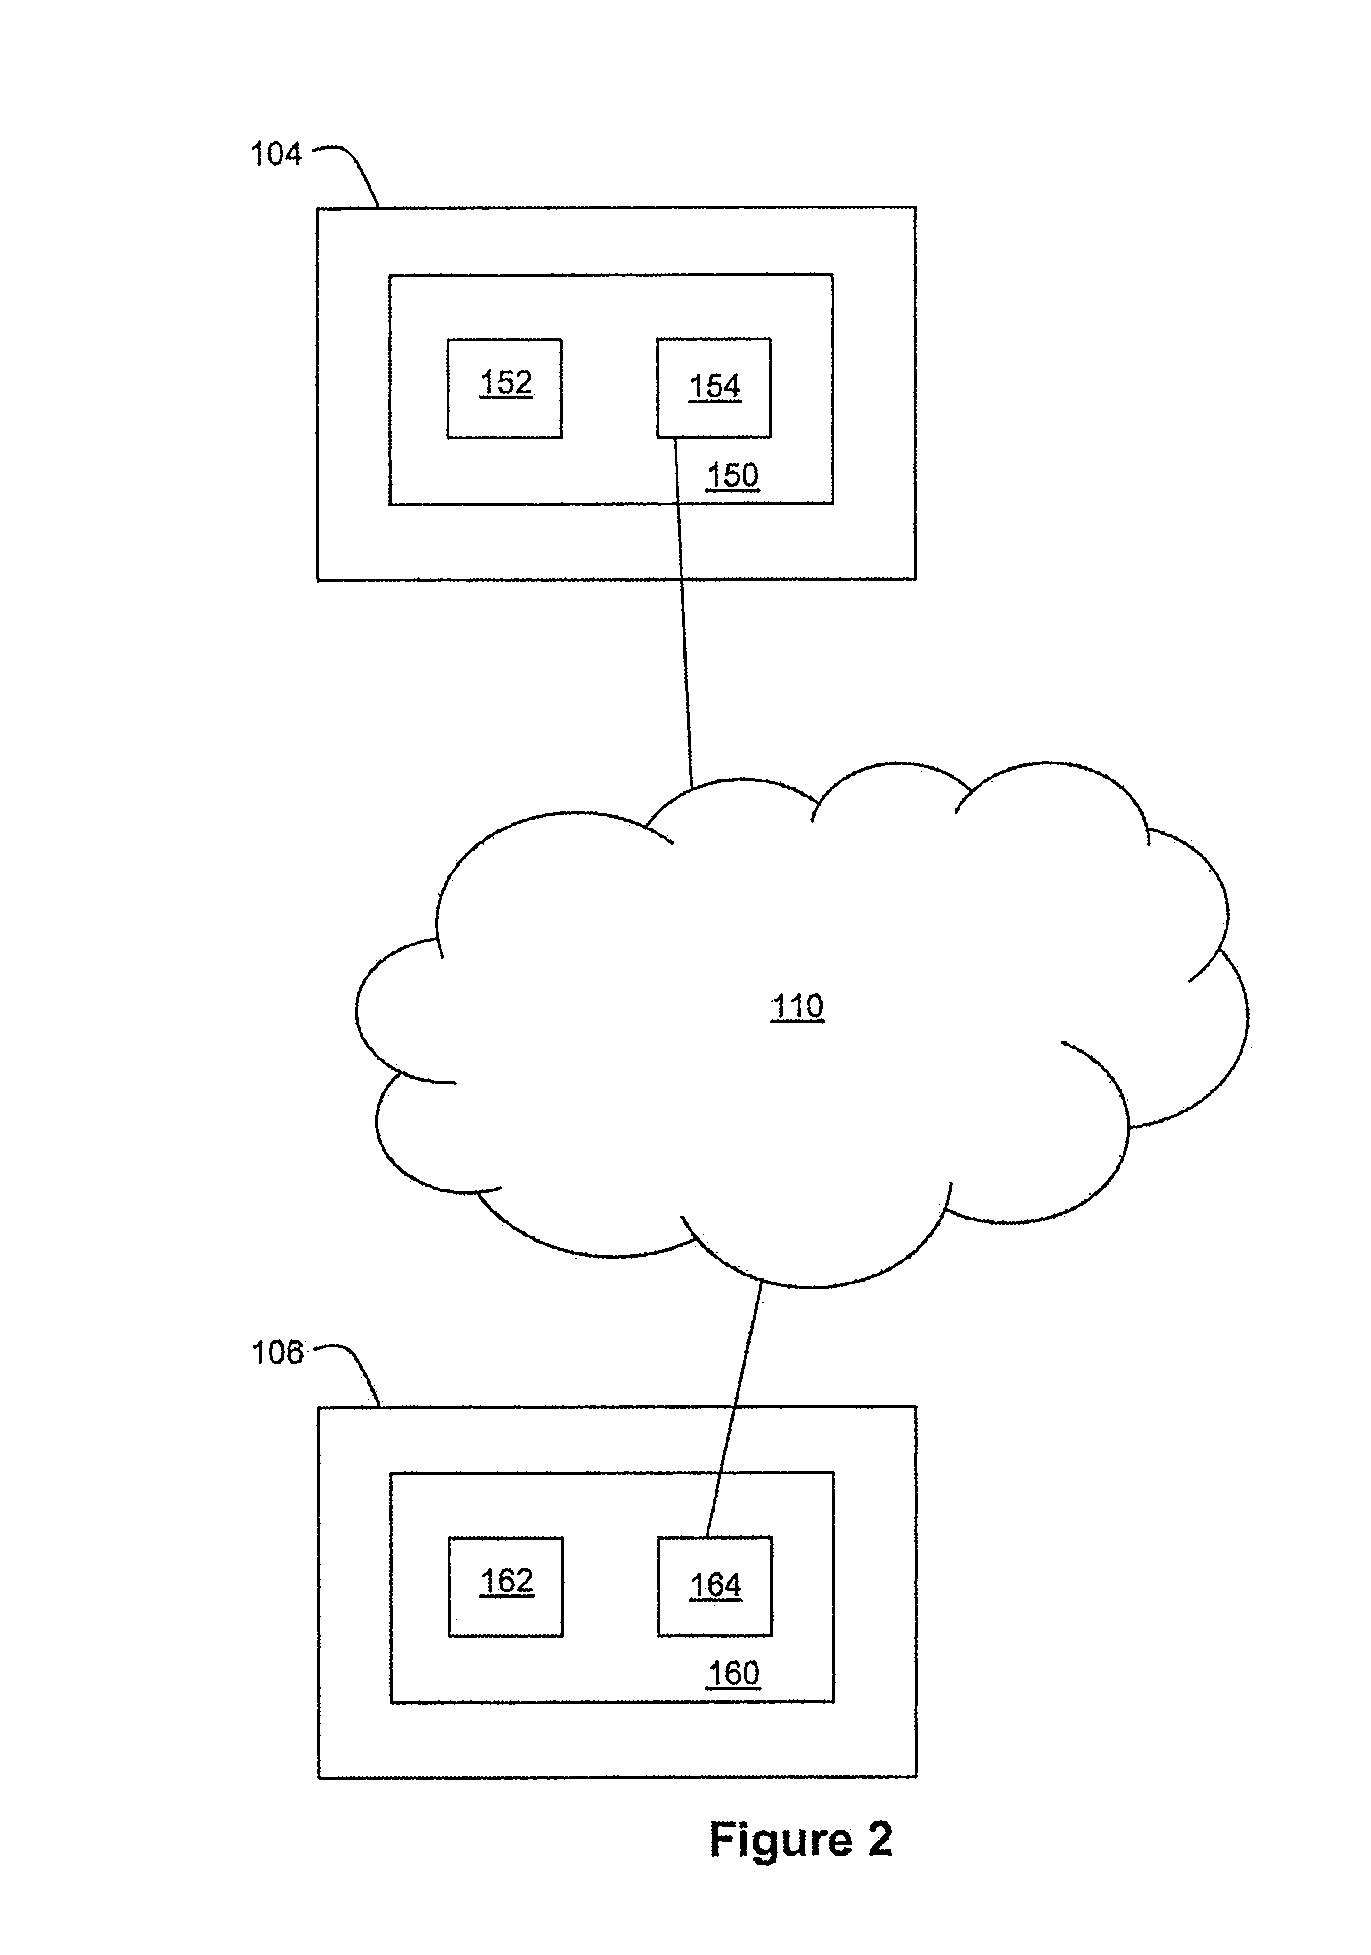 Methods for interactively displaying product information and for collaborative product design